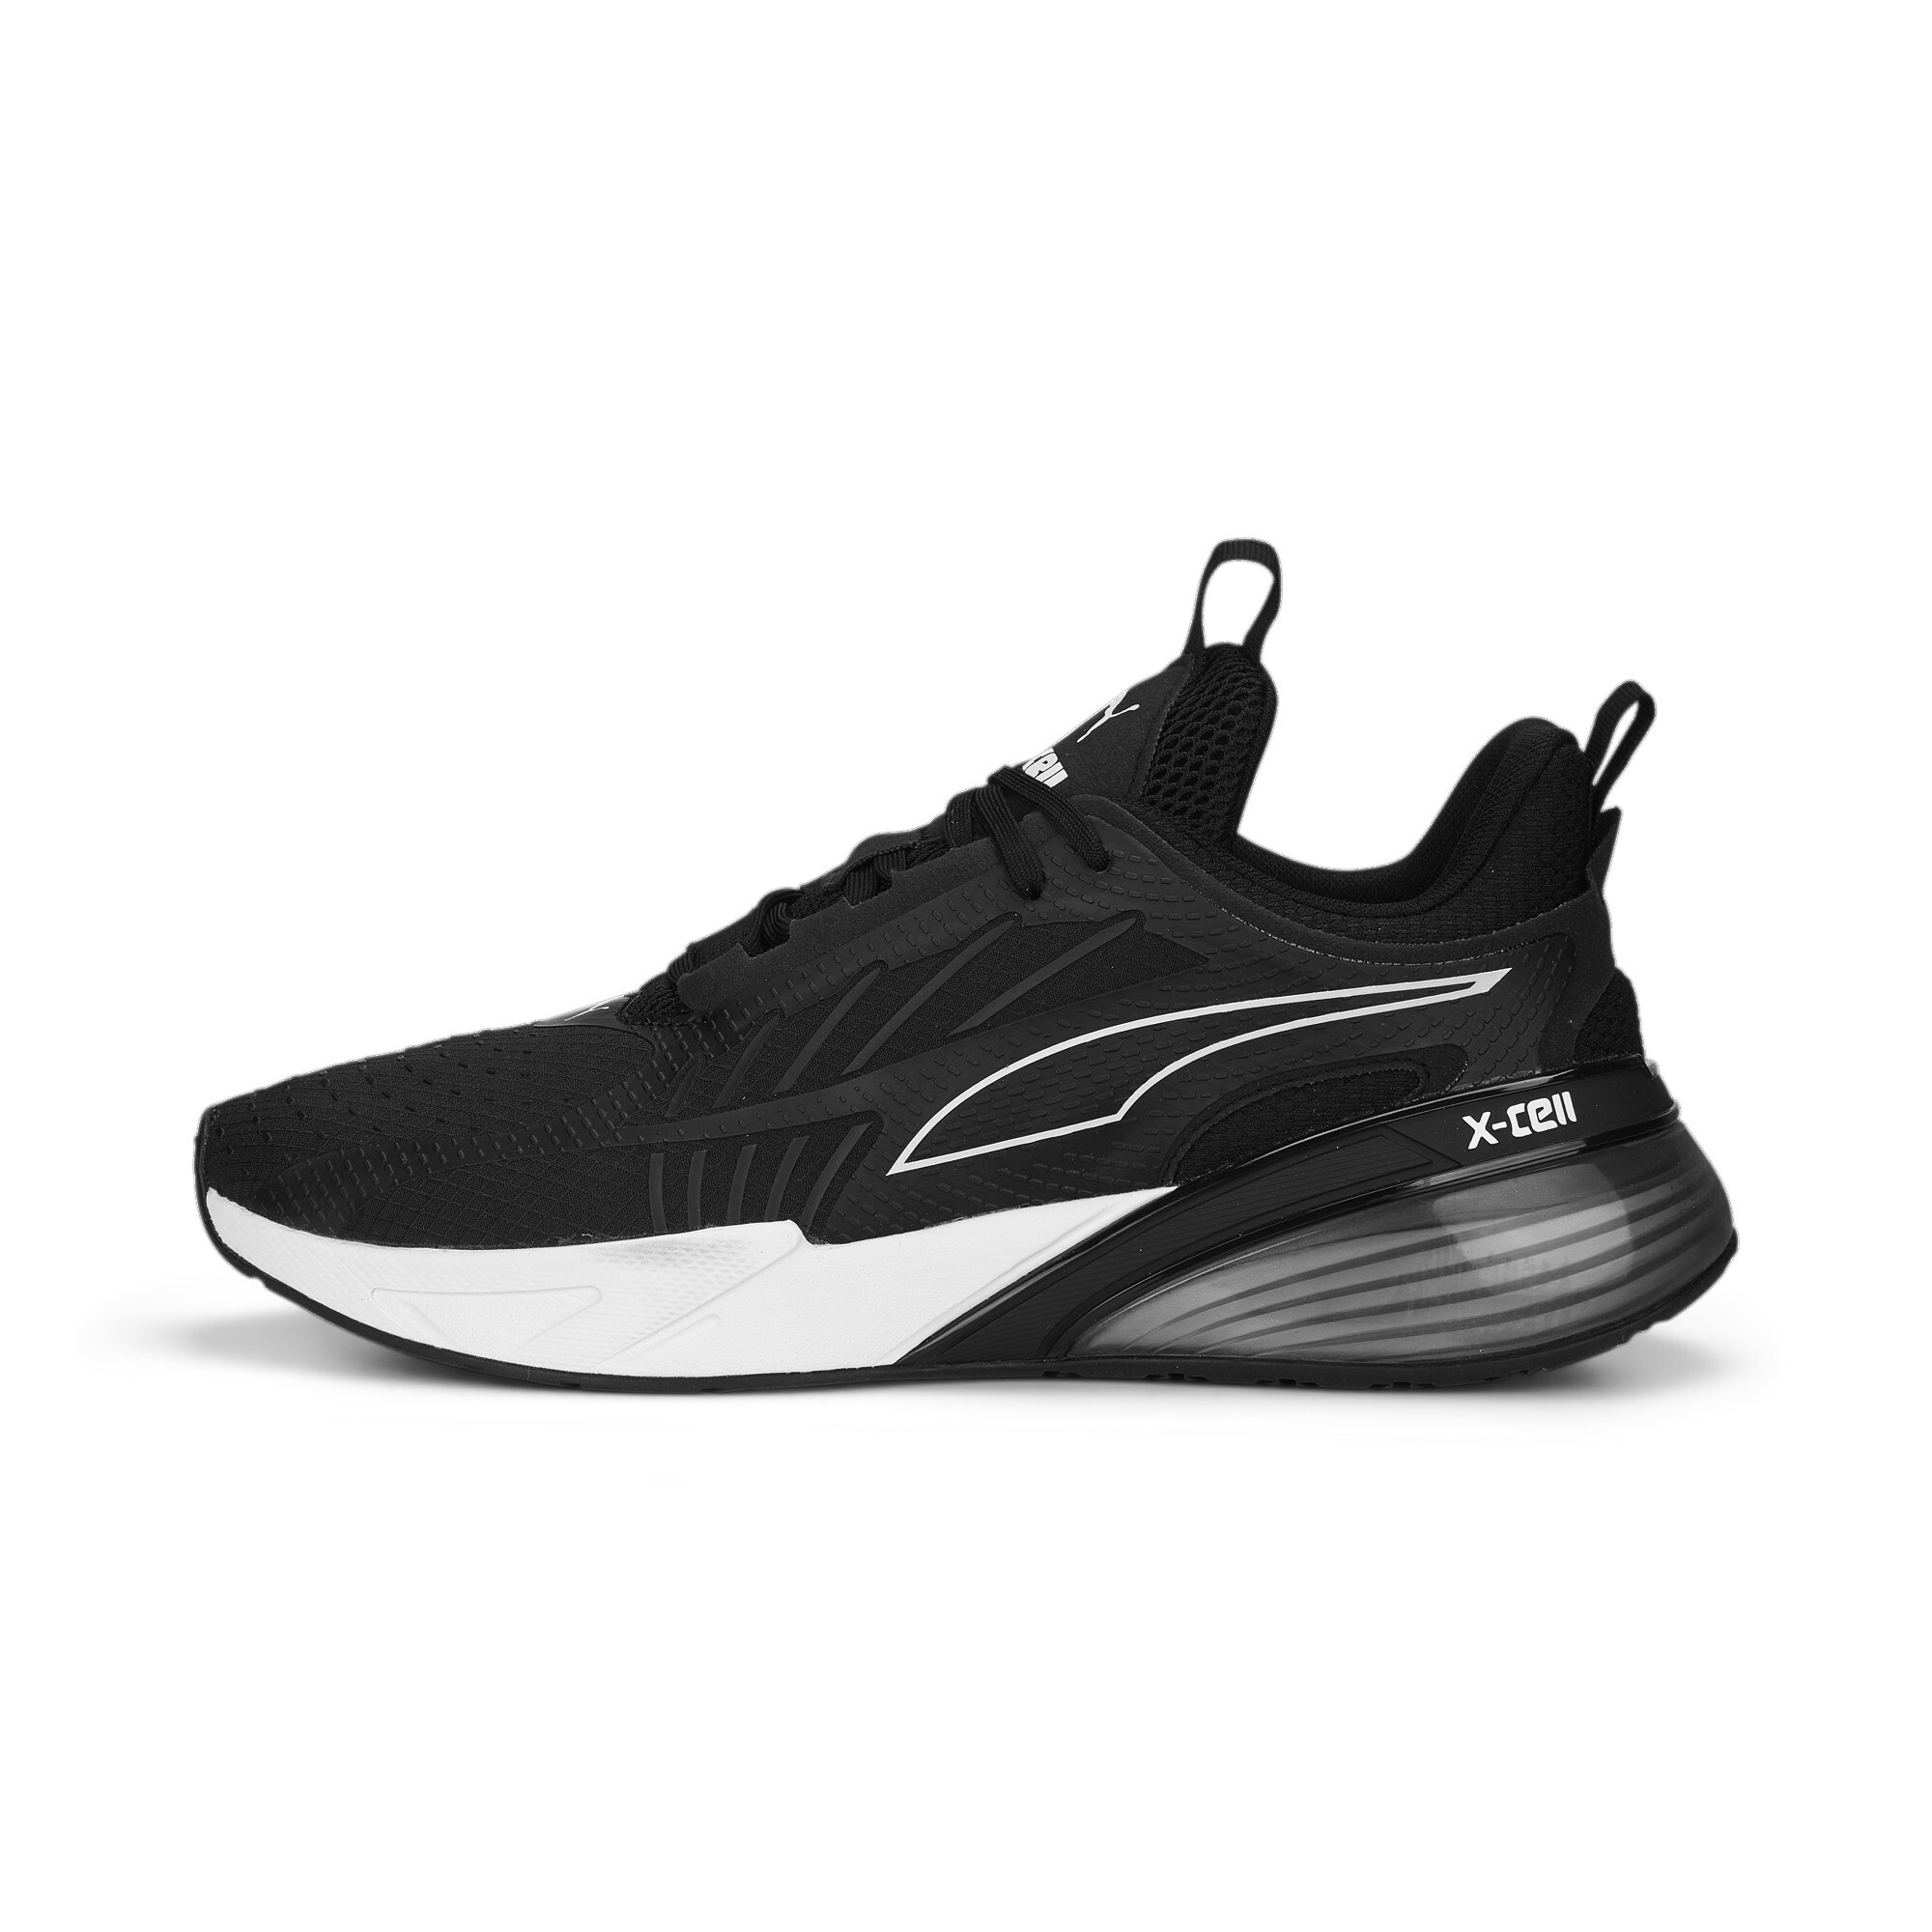 X-Cell Action Running Shoes | Running | PUMA